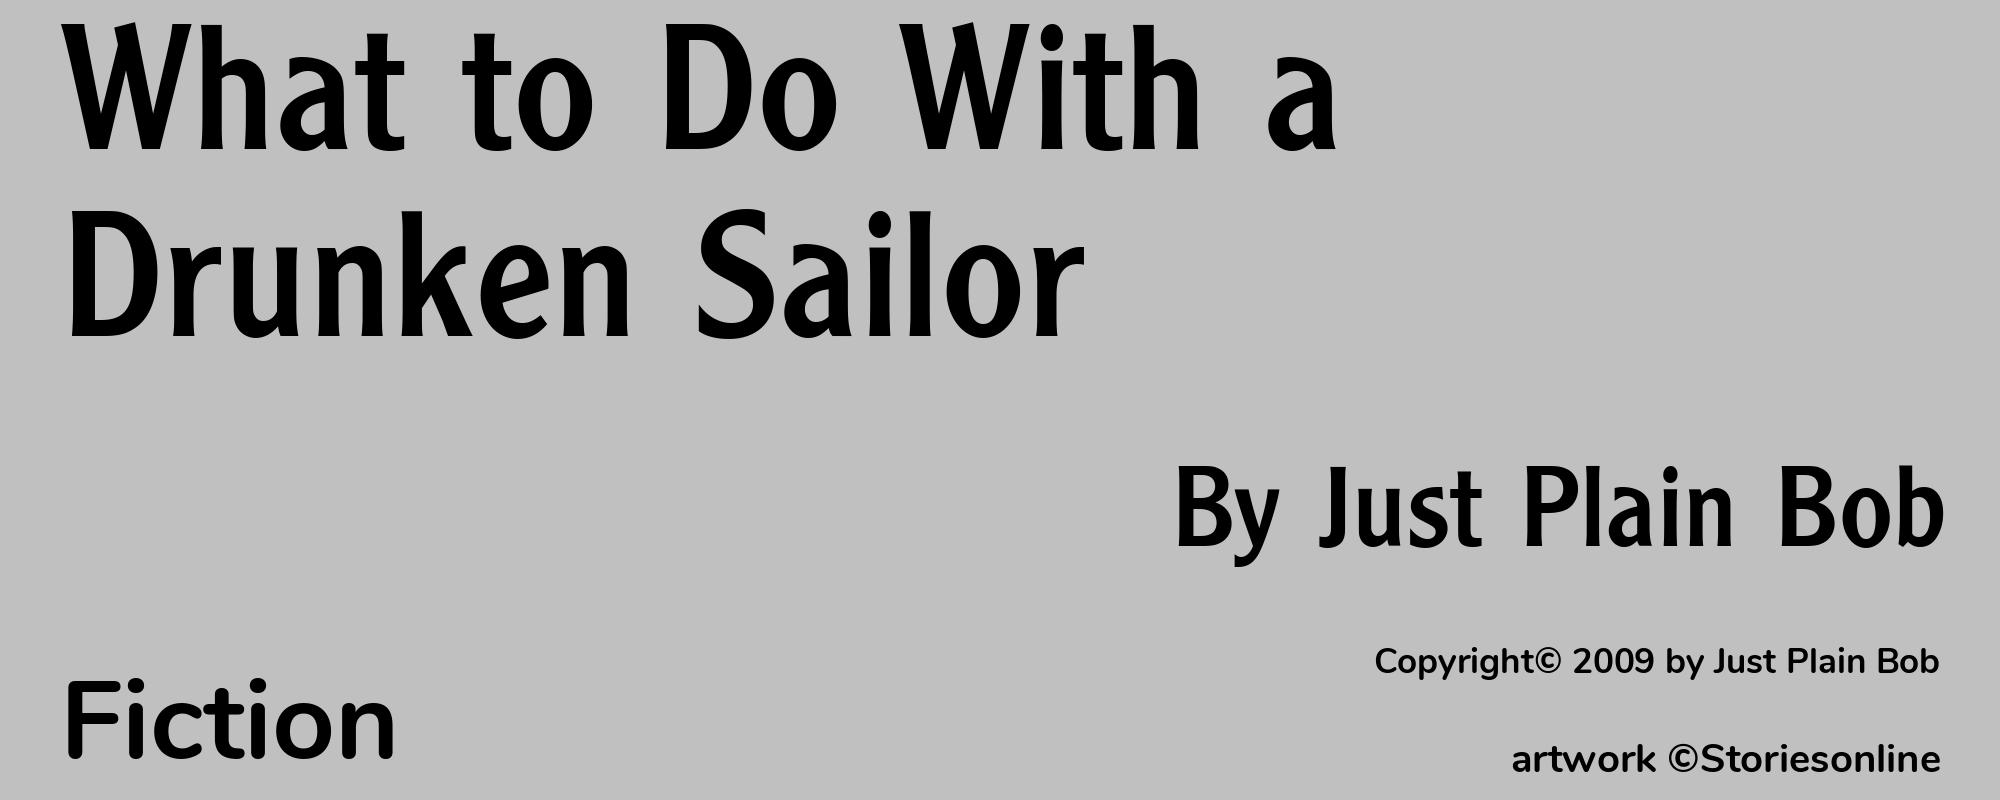 What to Do With a Drunken Sailor - Cover